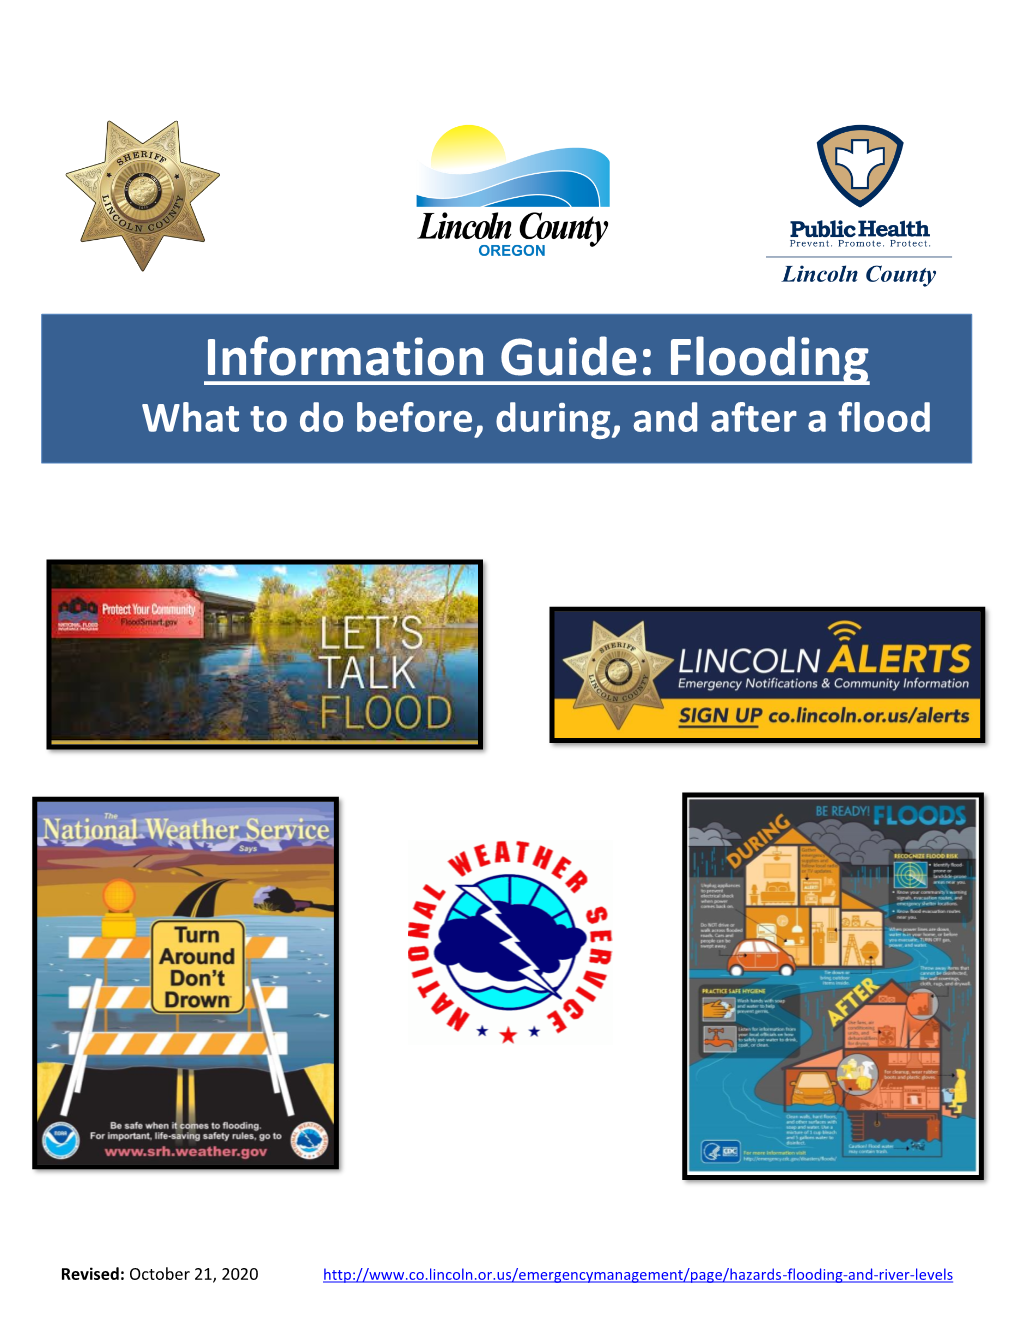 Information Guide: Flooding What to Do Before, During, and After a Flood